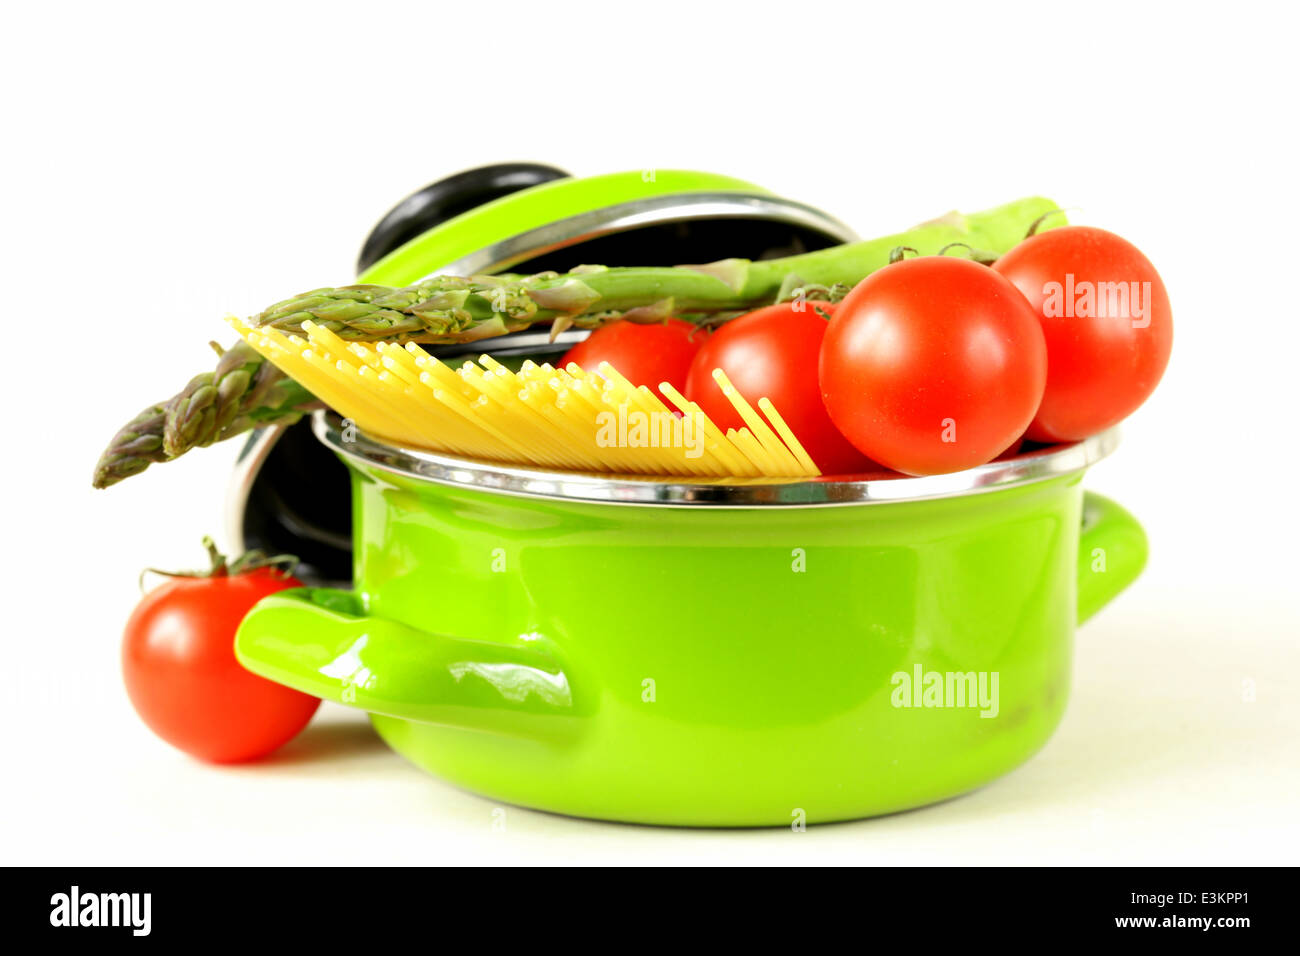 green pot full of vegetables (tomatoes, asparagus, mushrooms, broccoli) and pasta Stock Photo